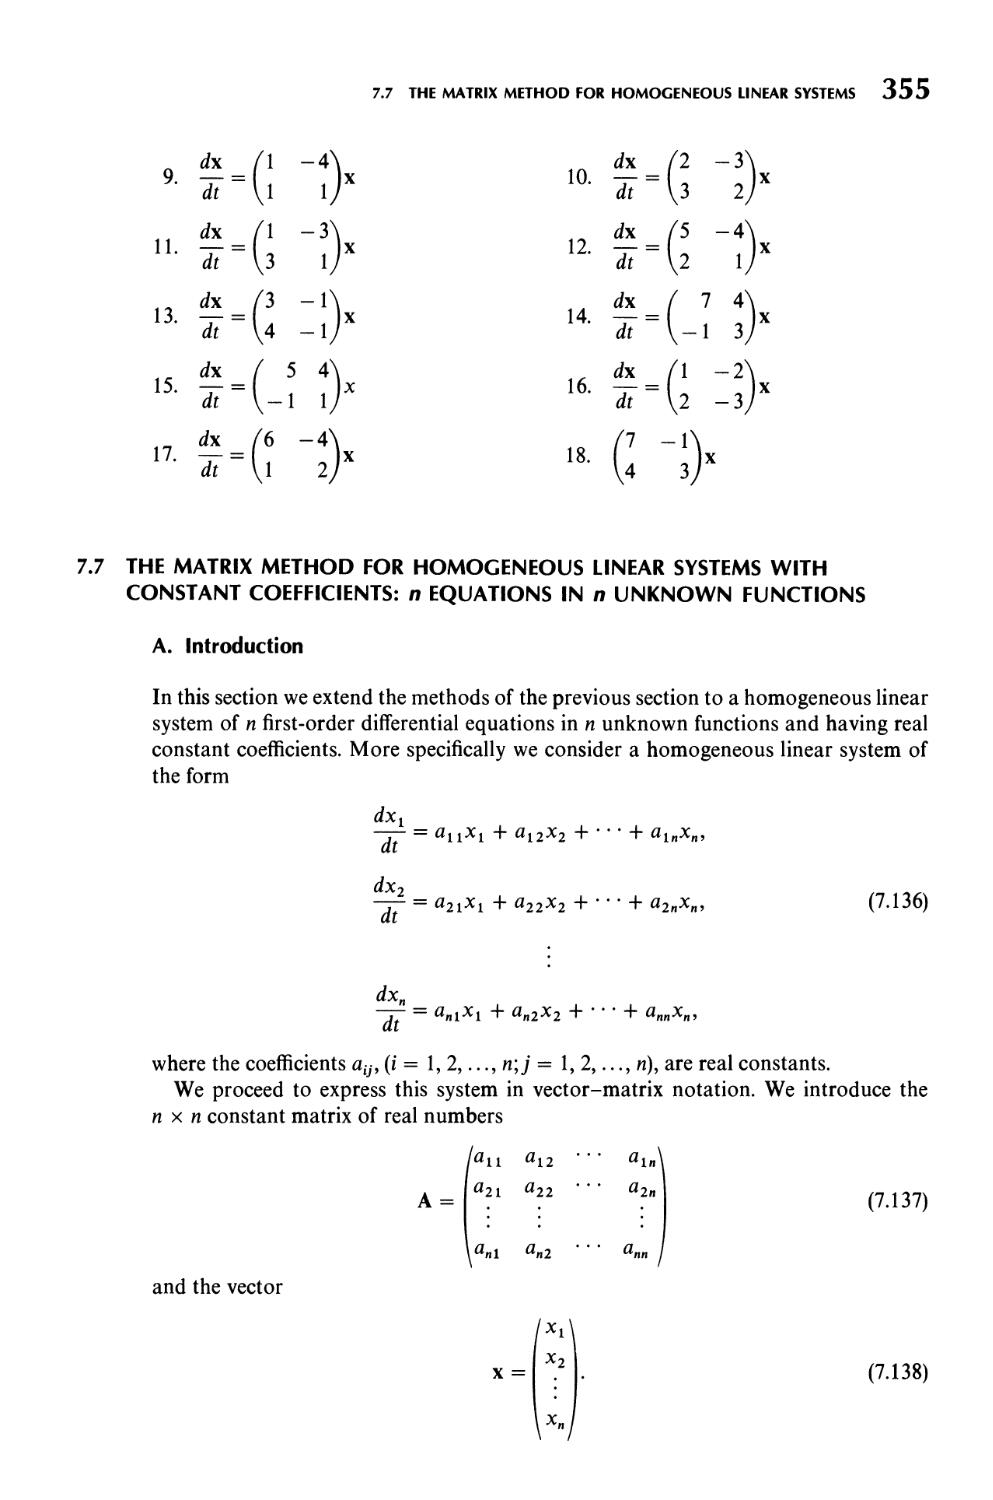 7.7  The Matrix Method for Homogeneous Linear Systems with Constant Coefficients